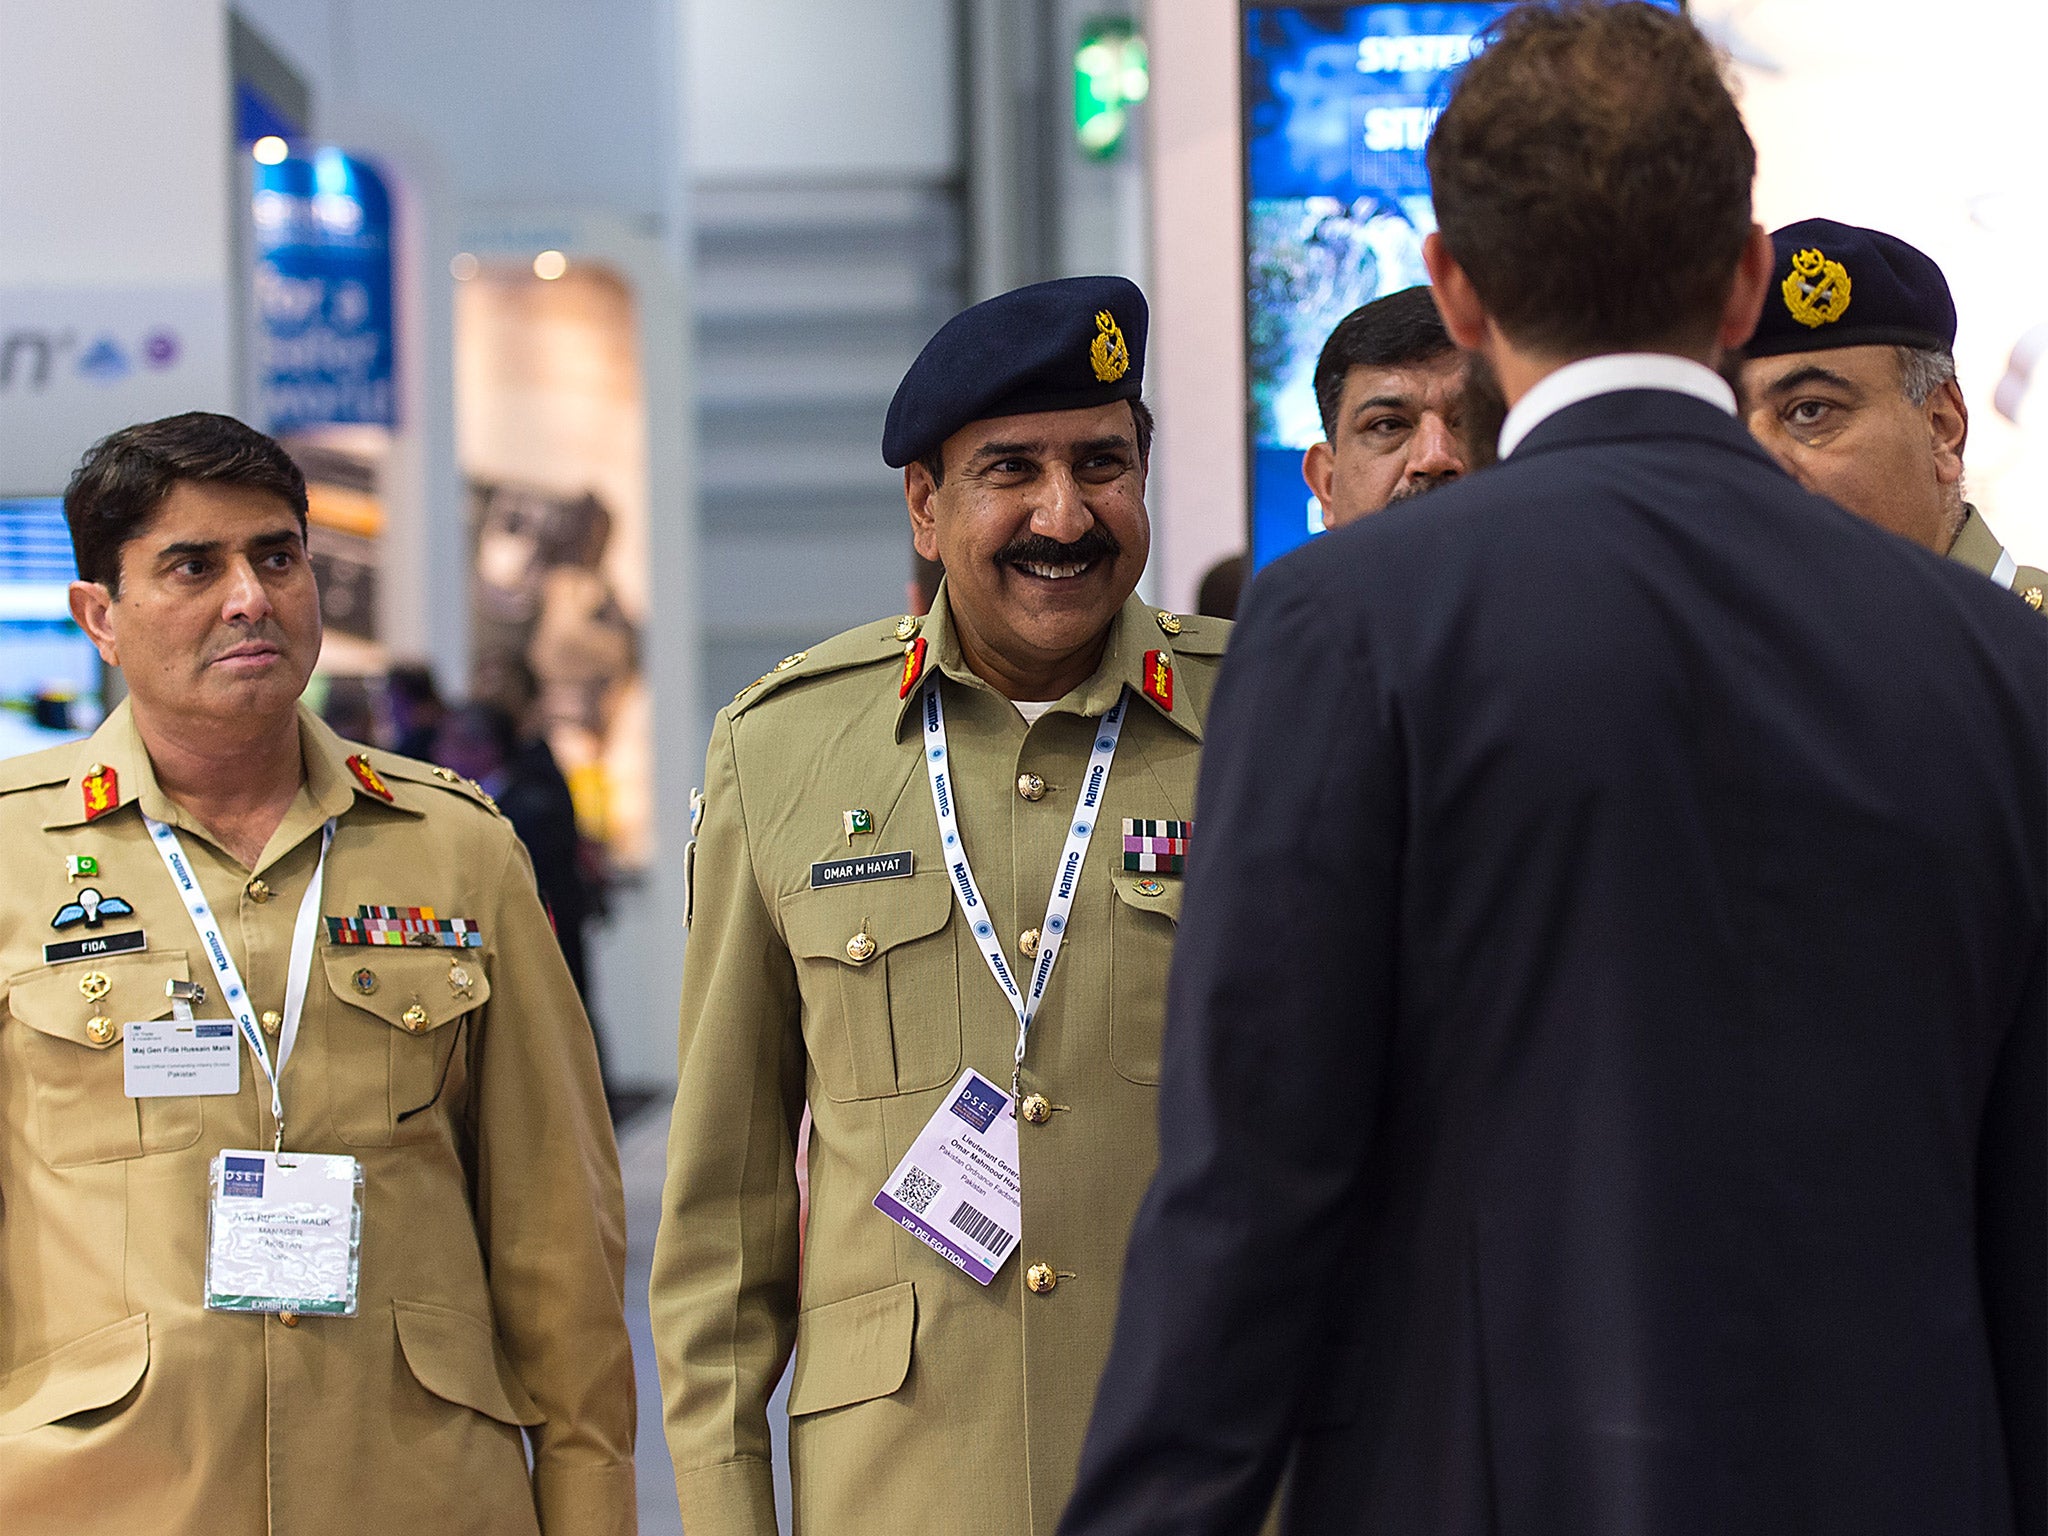 Pakistani military personnel attended the DSEI exhibition